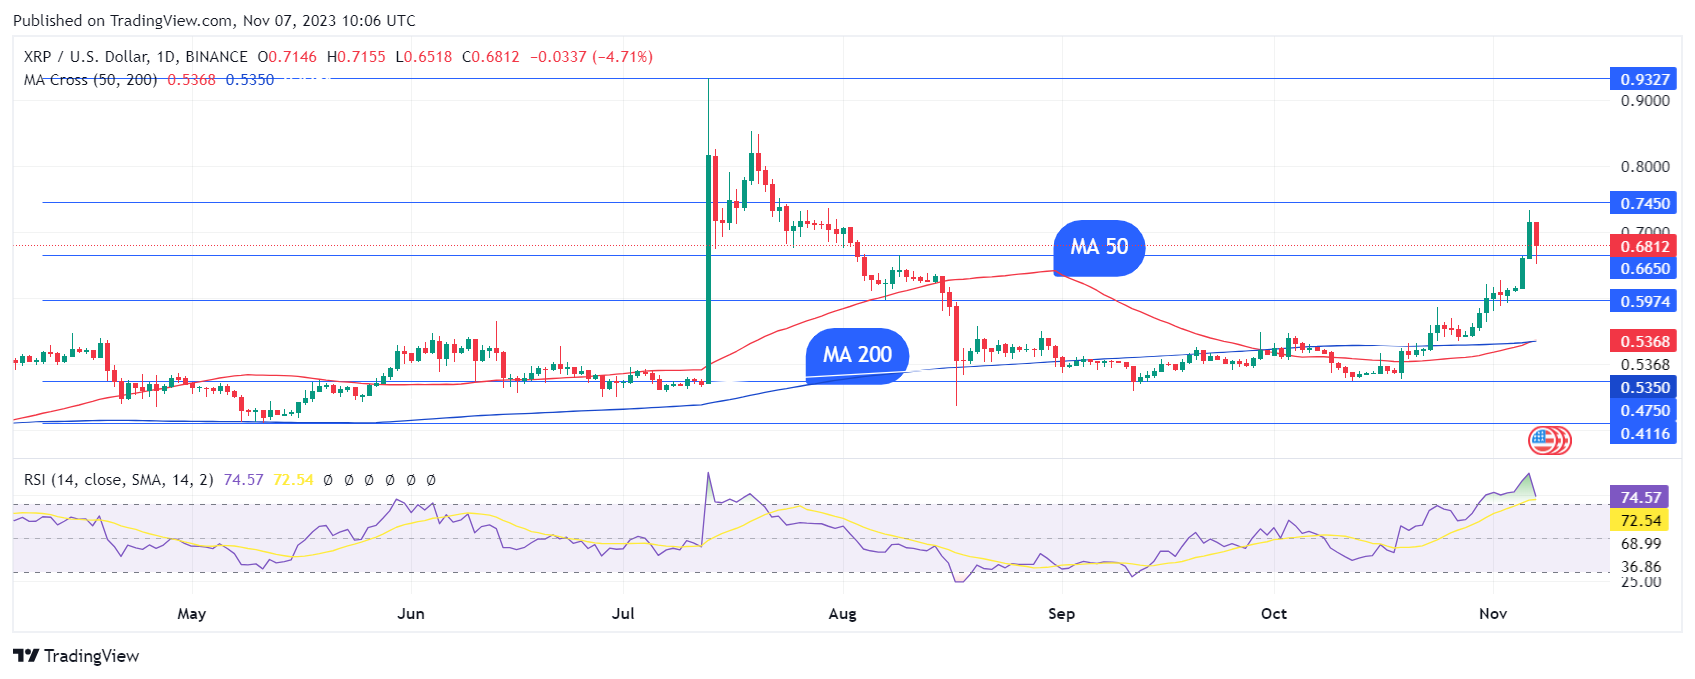 XRP Forms Golden Cross For The Second Time This Year. Here's the Significance